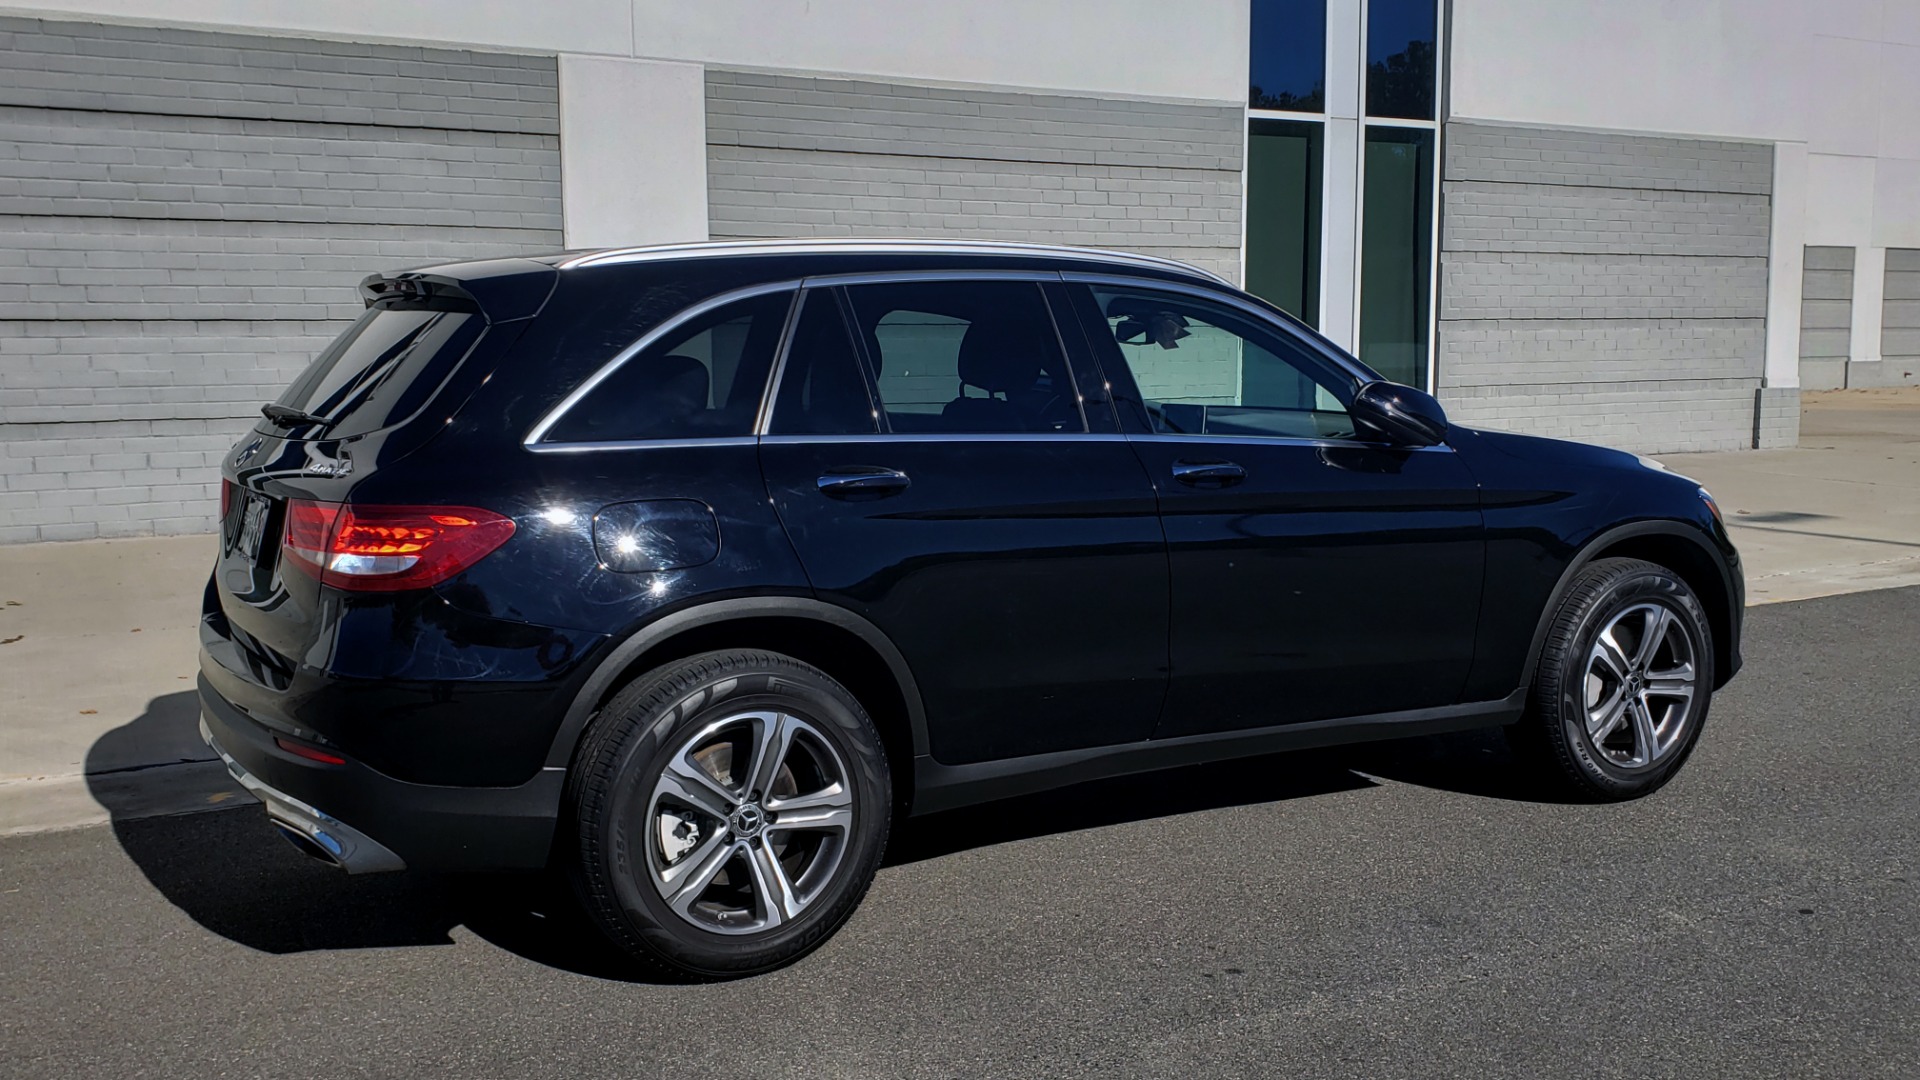 Used 2019 Mercedes-Benz GLC 300 4MATIC PREMIUM / KEYLESS-GO / PANO-ROOF / BSA / HTD STS for sale Sold at Formula Imports in Charlotte NC 28227 10